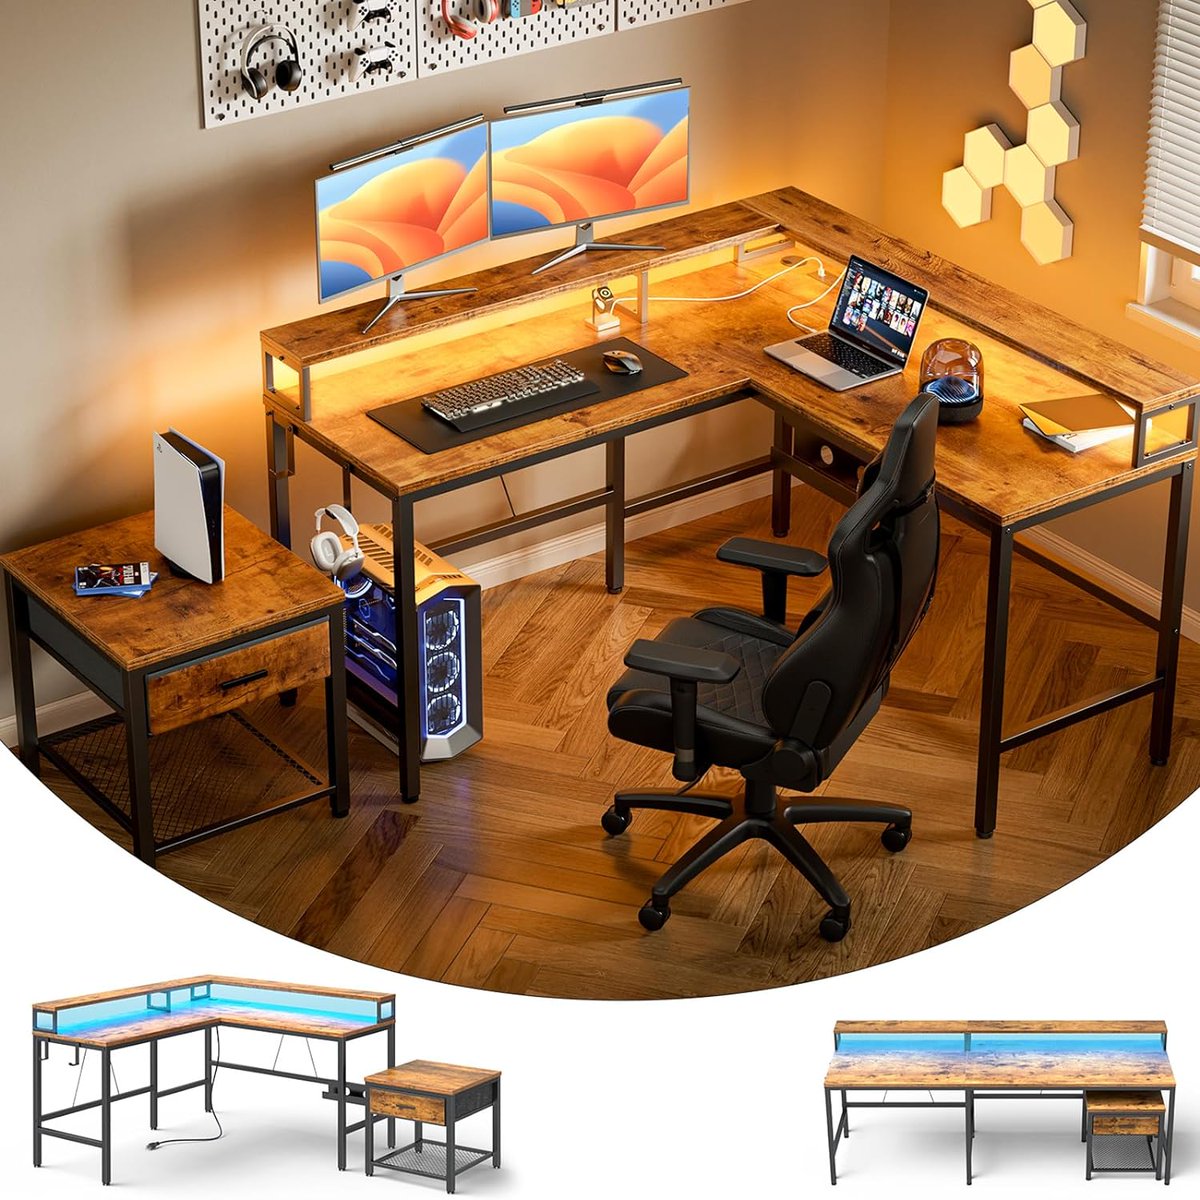 Marsail L-Shaped Gaming Desk with Monitor Riser & Printer Stand Coupon on Page! amzn.to/3VzZ4Gd #ad